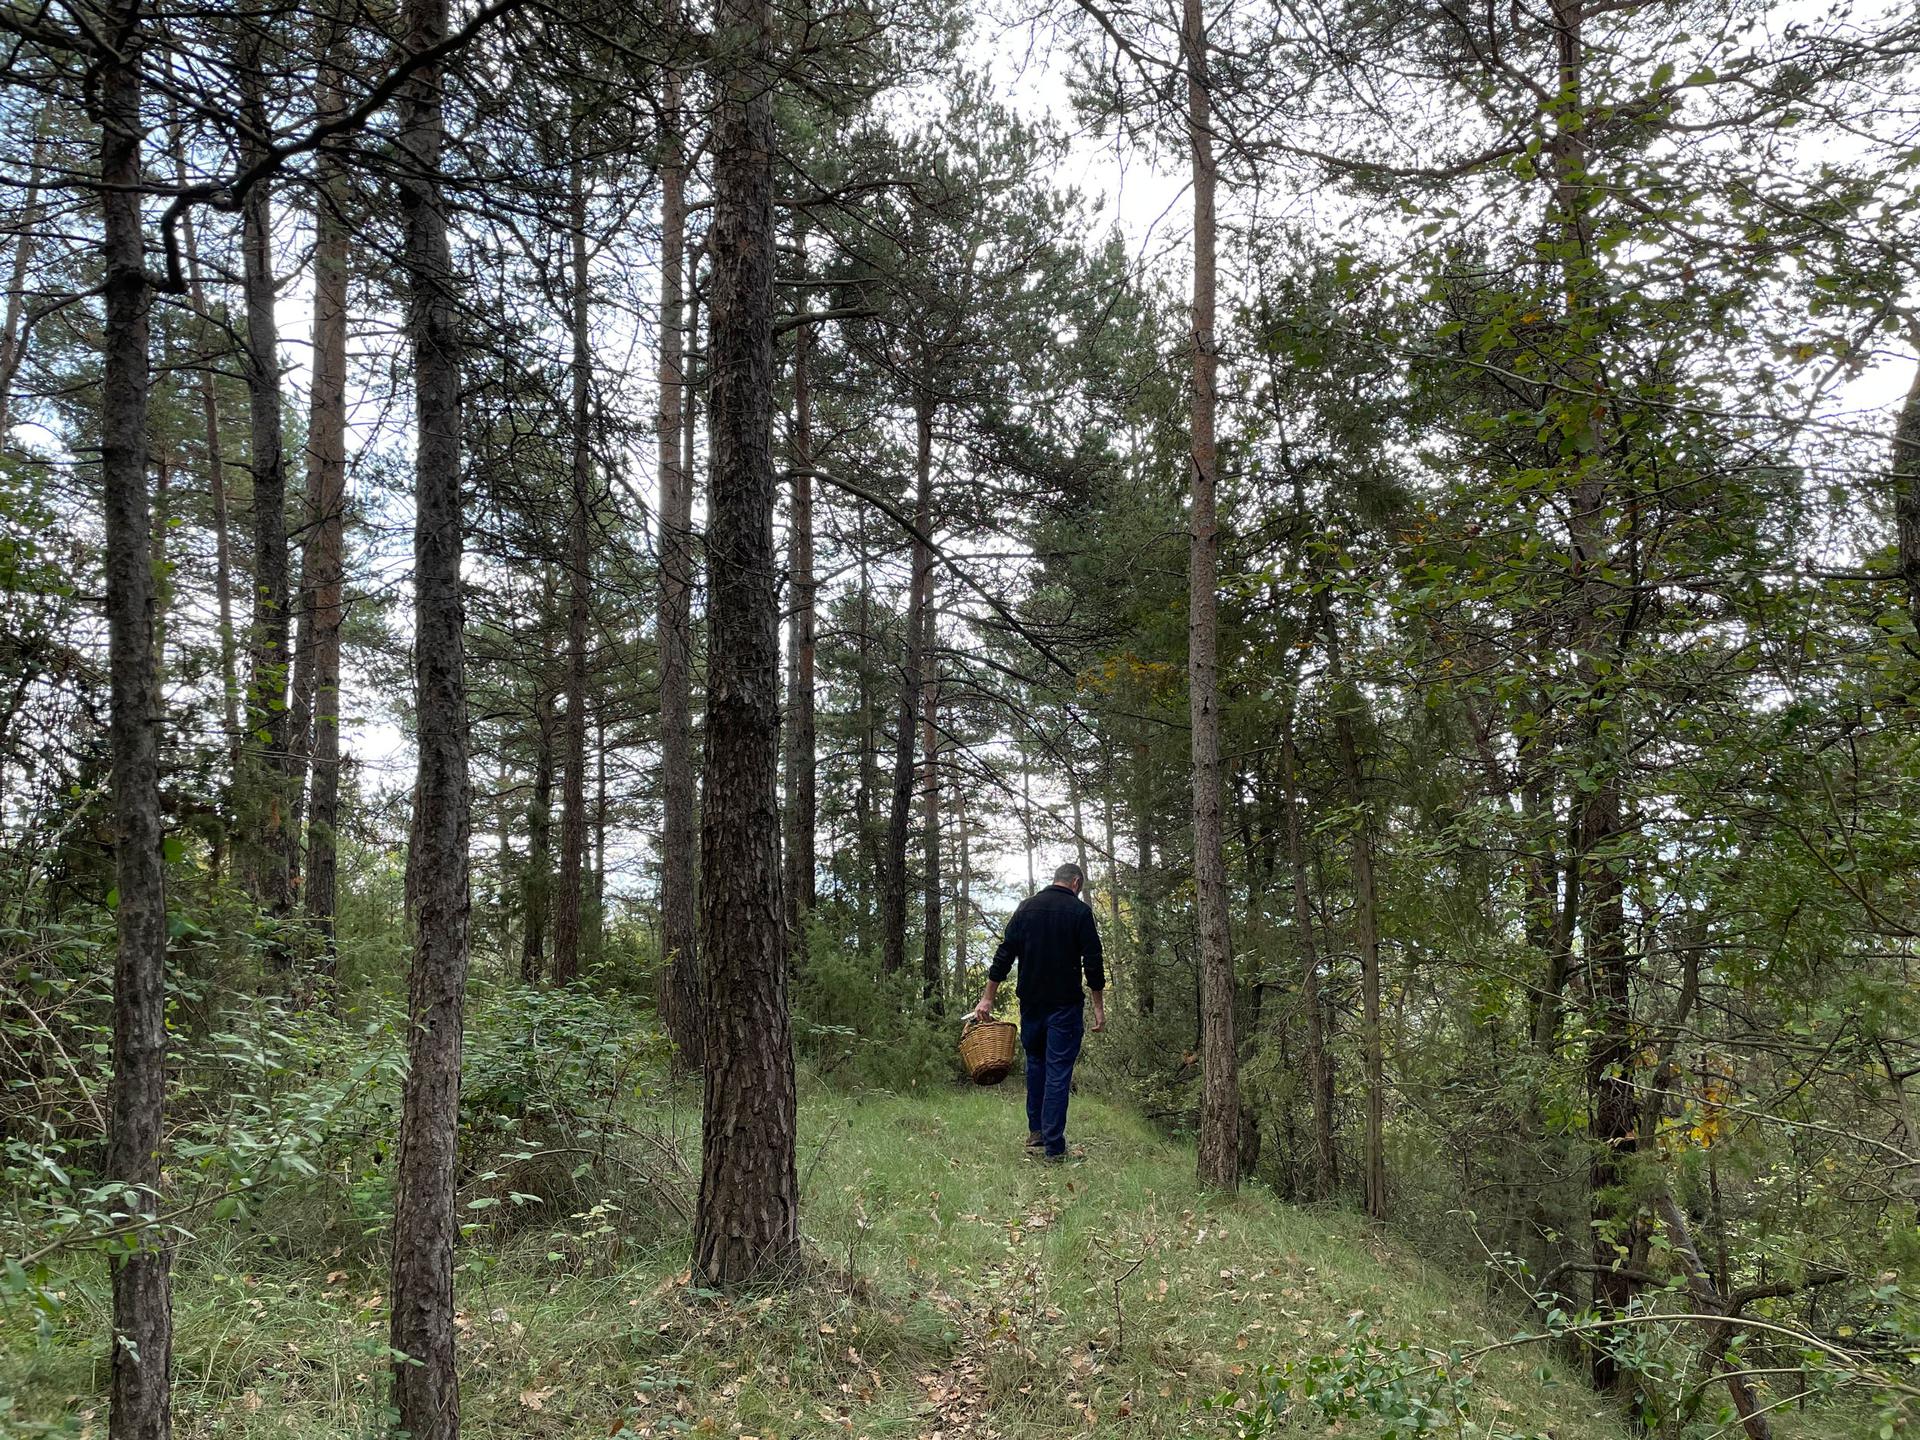 Pep González, a longtime mushroom forager, on a hunt for mushrooms in the forest. 